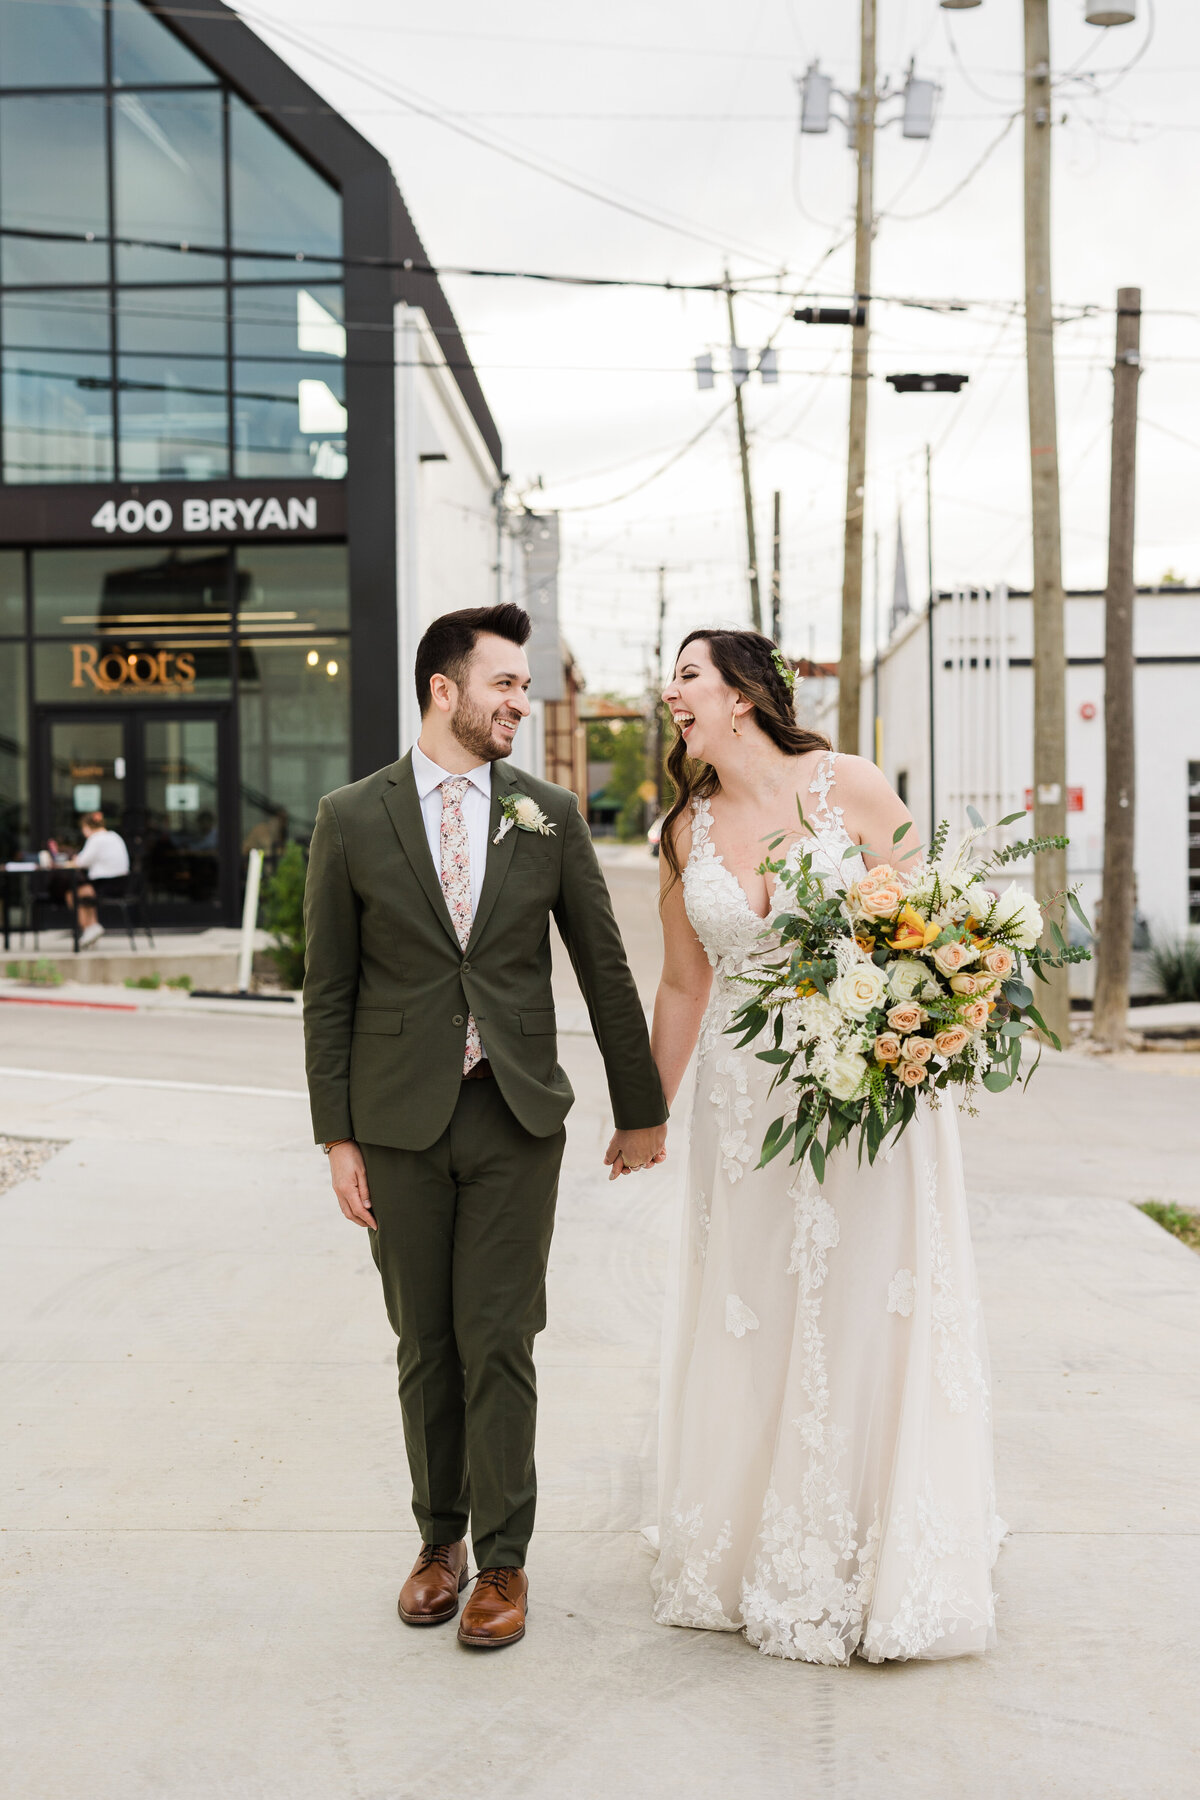 A portrait of a bride and groom walking outside and smiling at each other after their wedding at The 4 Eleven in Fort Worth, Texas. The bride is on the right and is wearing a sleeveless, intricate white dress with a large bouquet. The groom is on the left and is wearing a dark green suit with a floral tie and boutonniere.